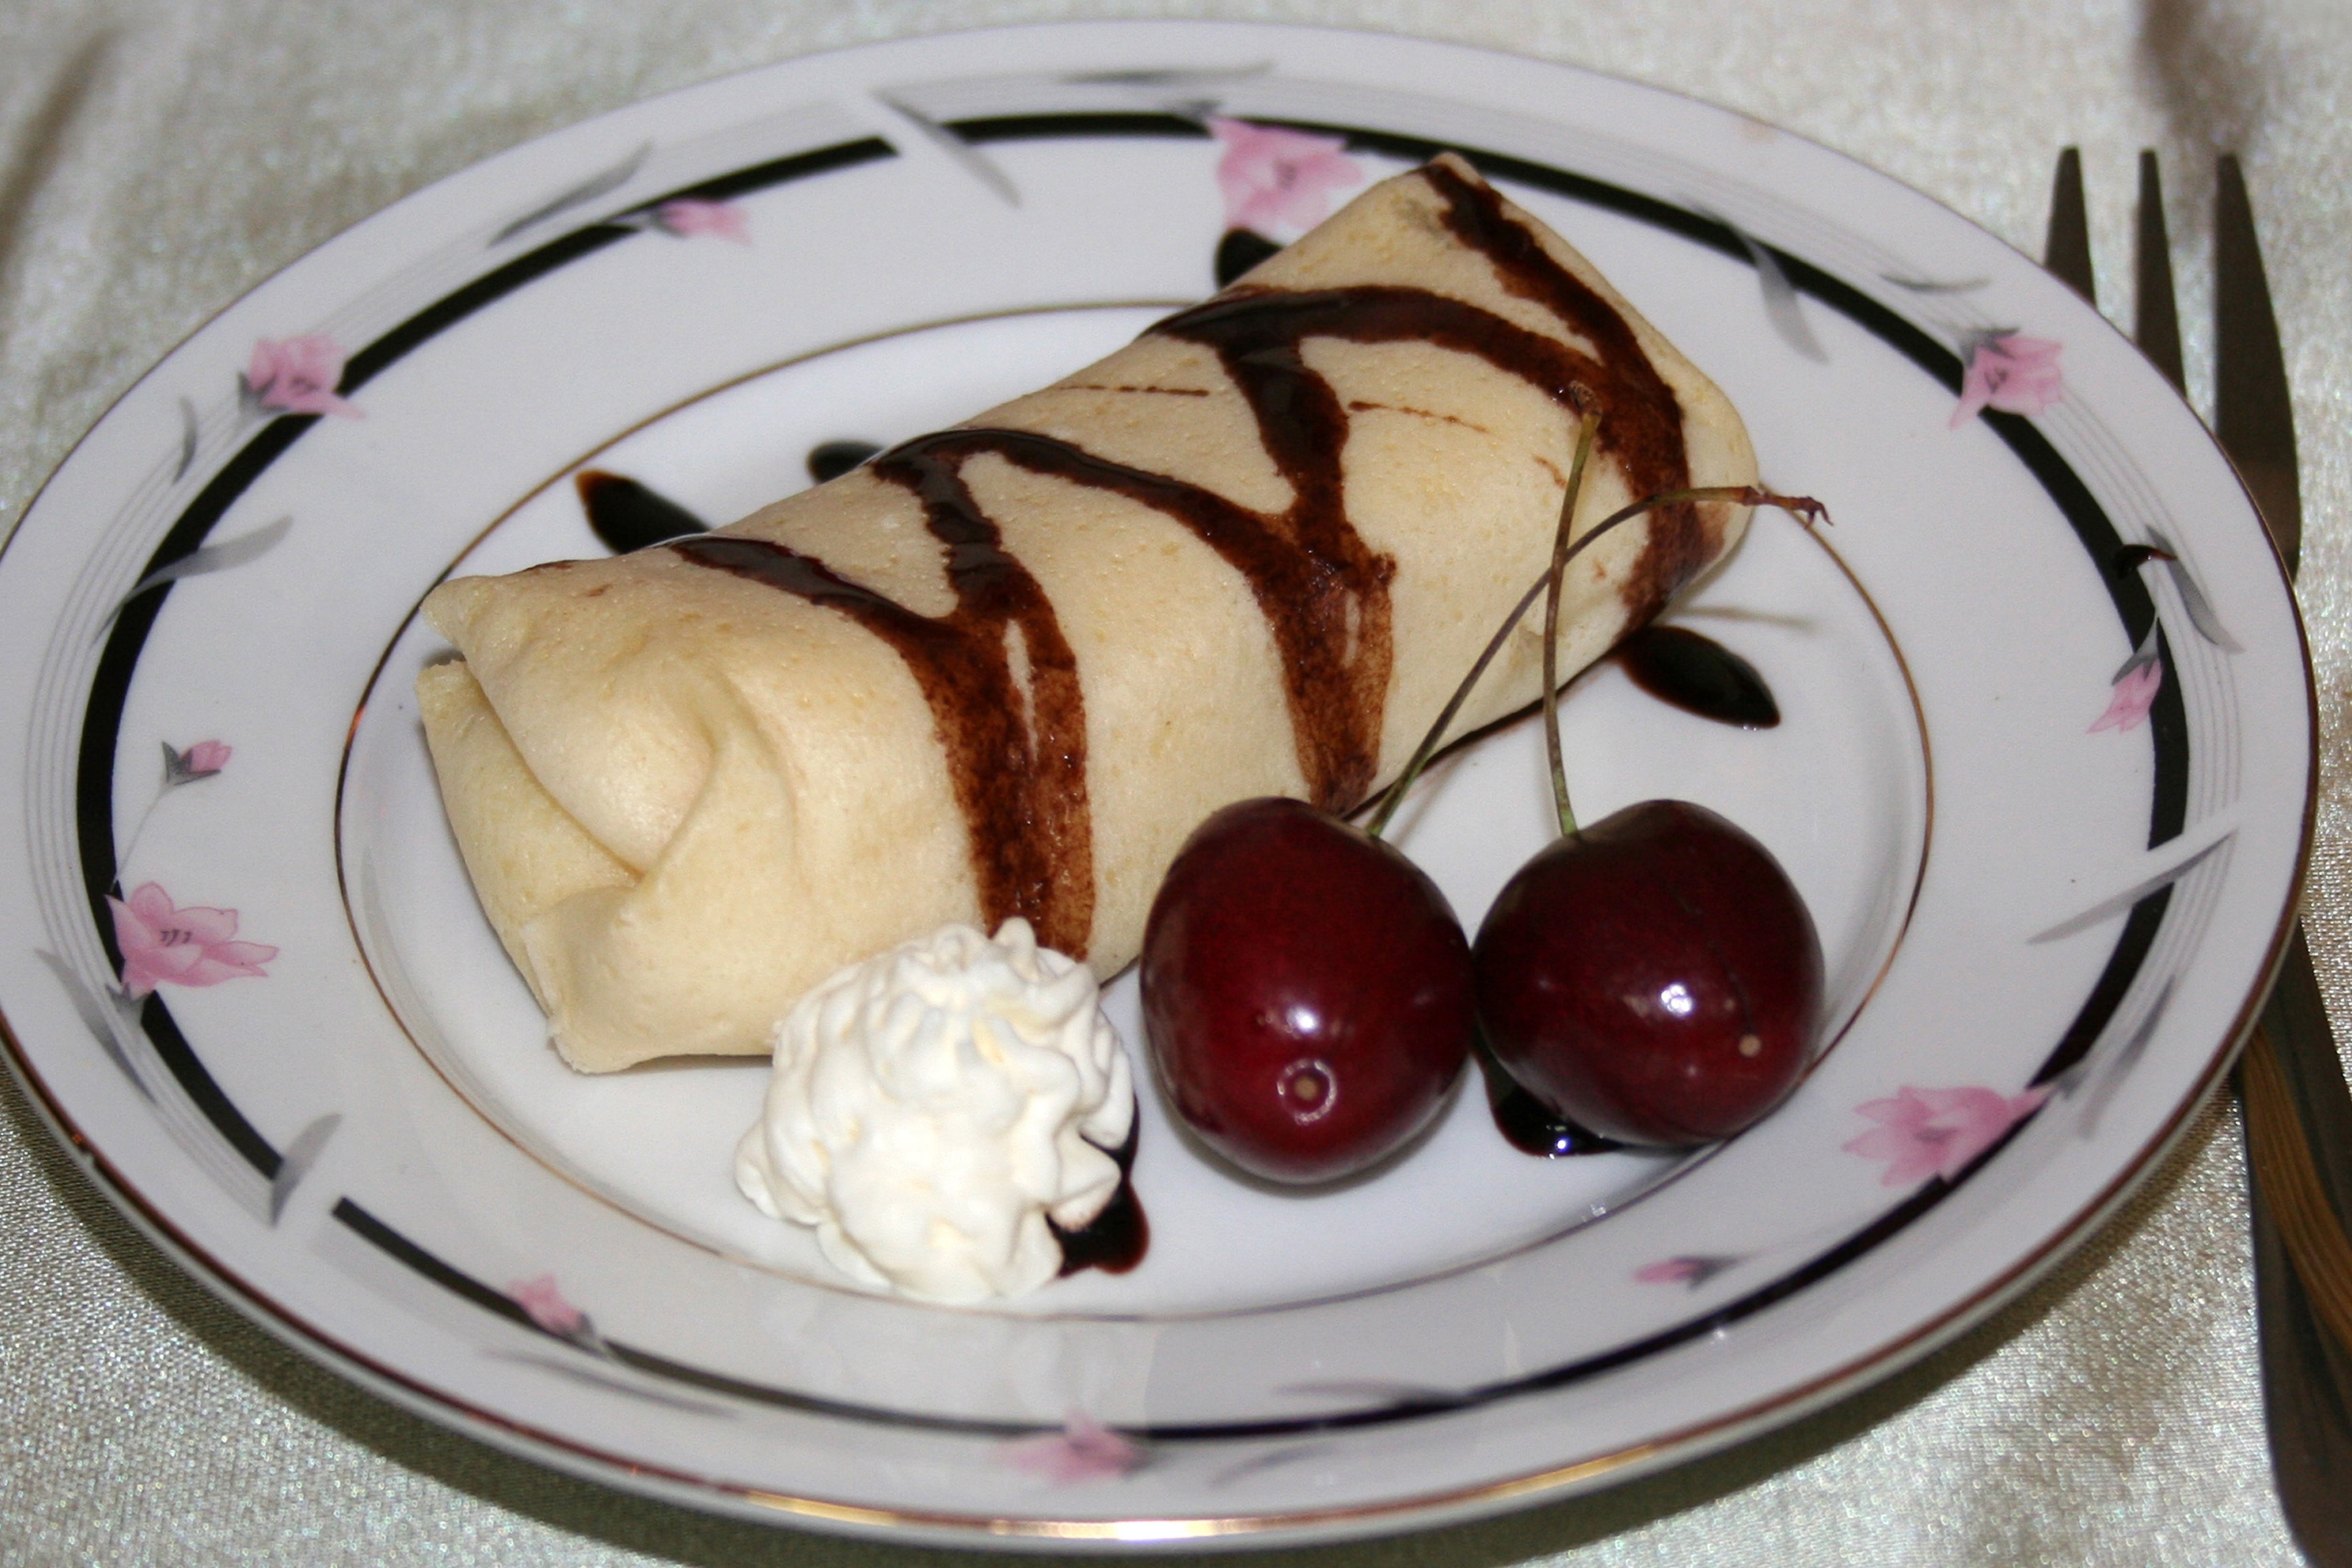 spring roll and 2 cherries